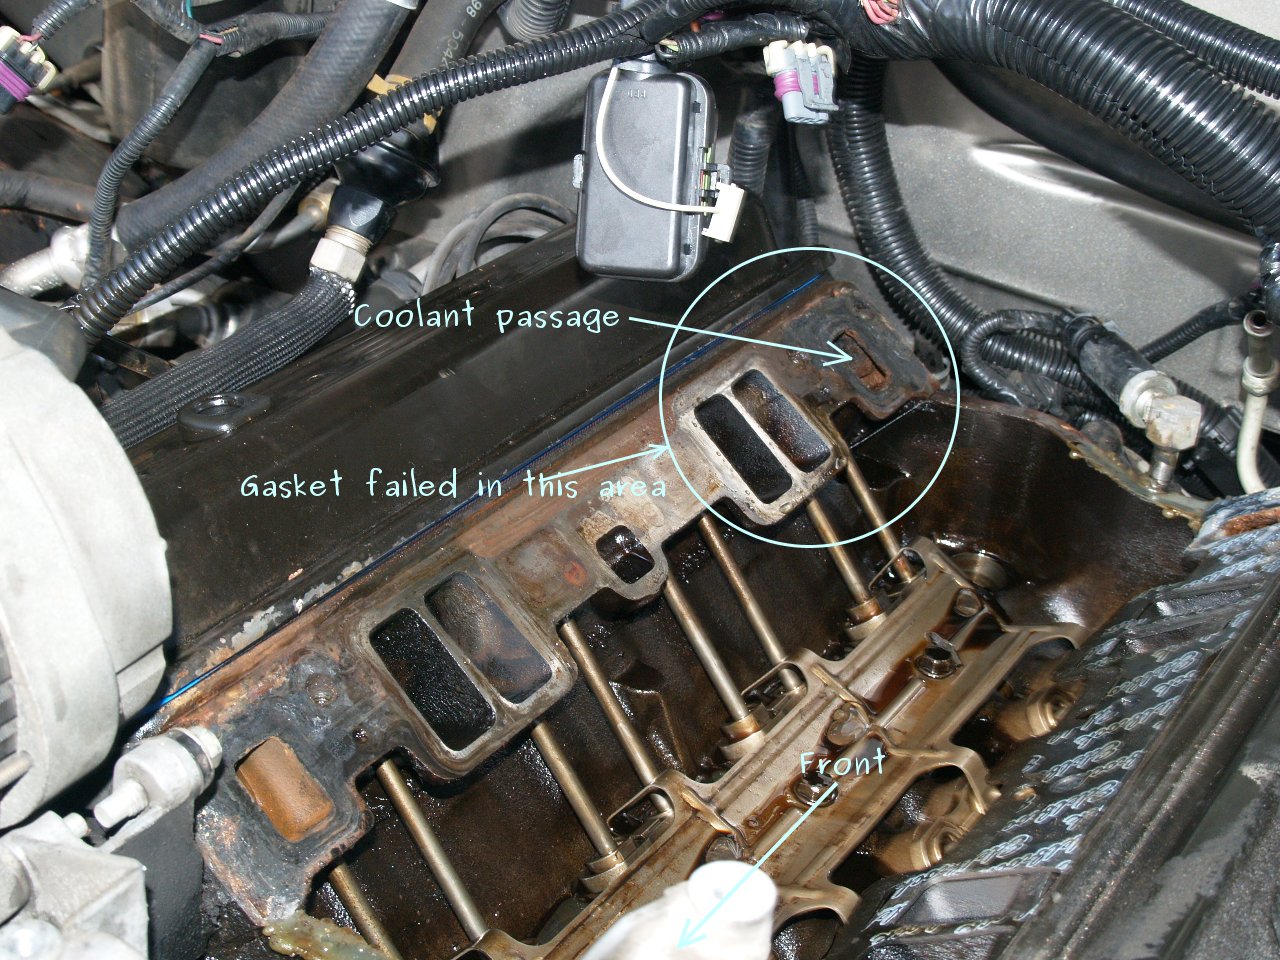 See P0714 in engine